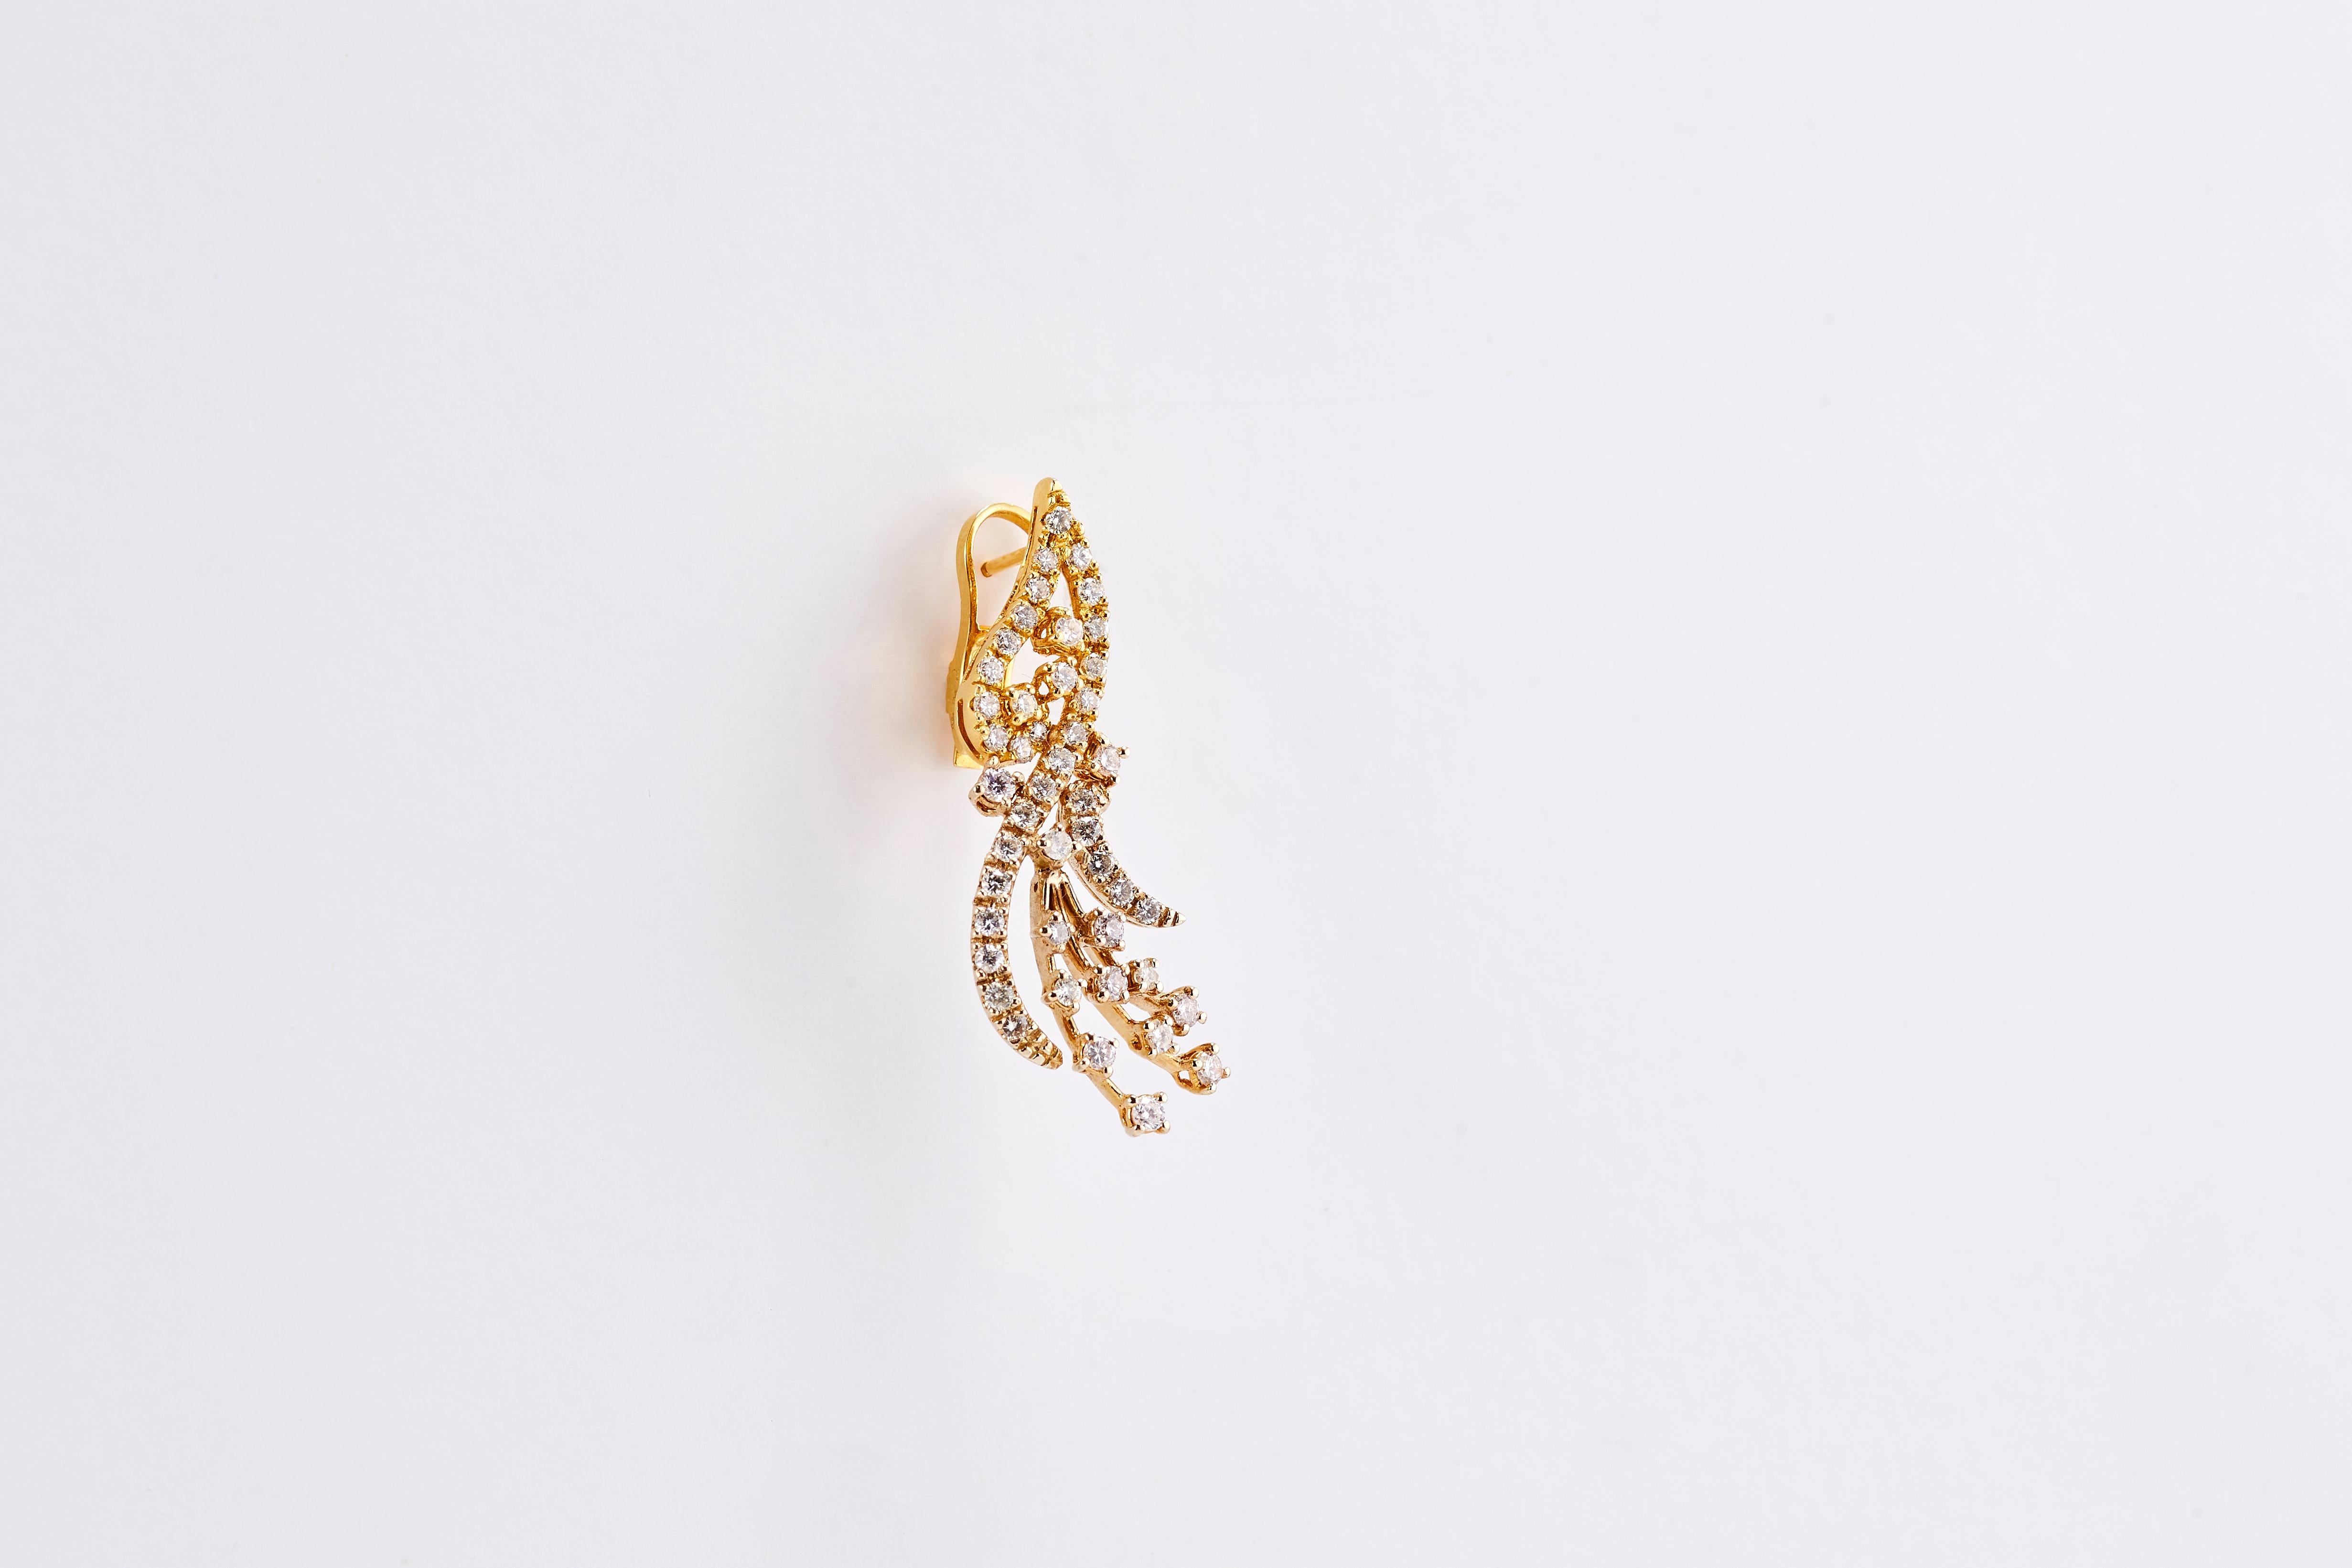 Pair of Glorious 18 Karat Yellow Gold Earrings 

With 2.70 carat of Diamonds
A pair of 18 K yellow gold drop earrings each one looks like a beautiful wing. 
Set with 100 brilliant cut Diamonds total of 2.70 ct G VS1.
Masterfully handcrafted